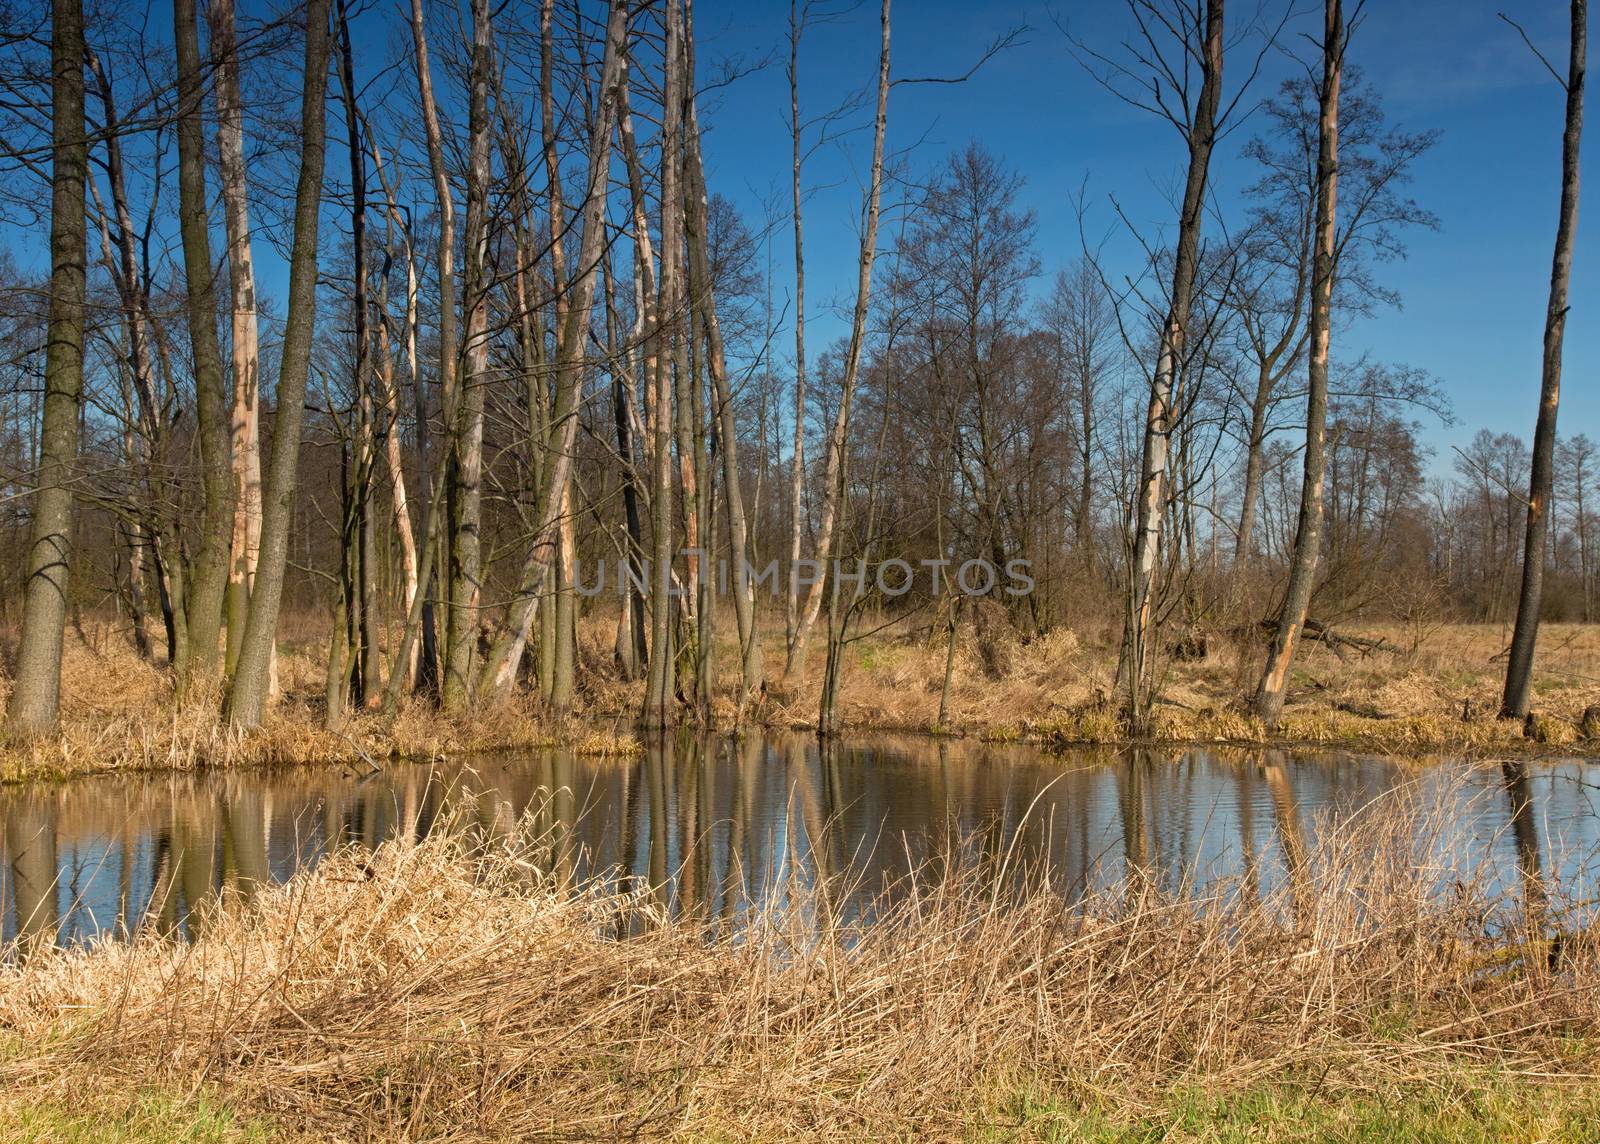 Poland,field pond and woodlots in early spring,beginning of April ,,landscape. Horizontal view.